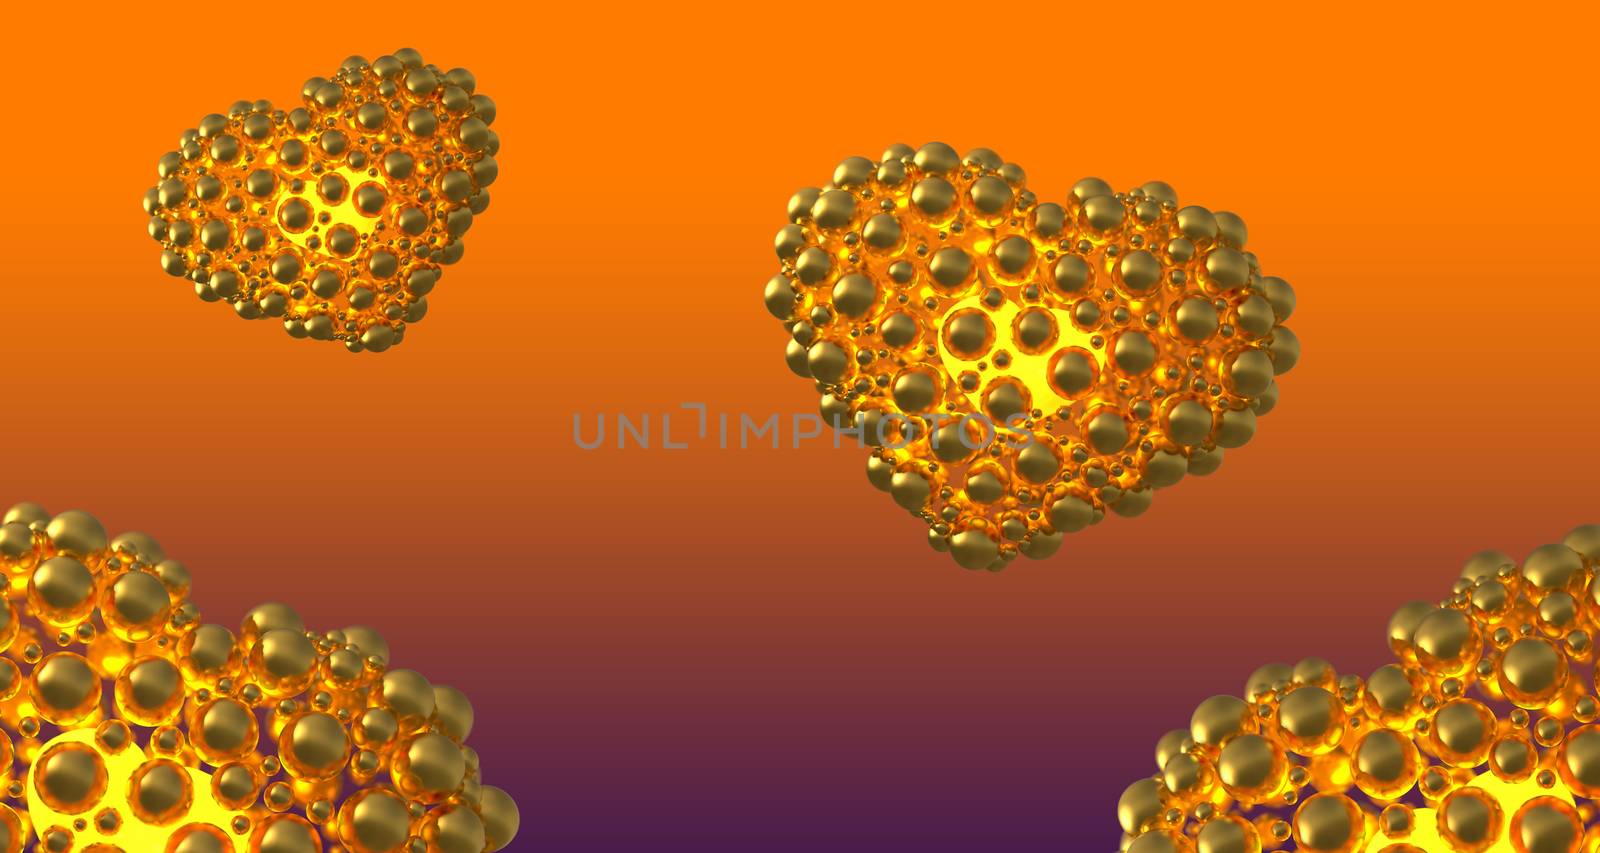 metal gold hearts made of spheres with reflections and flying over violet gradient bacground. Happy valentines day 3d illustration. Copyspace for your design text.